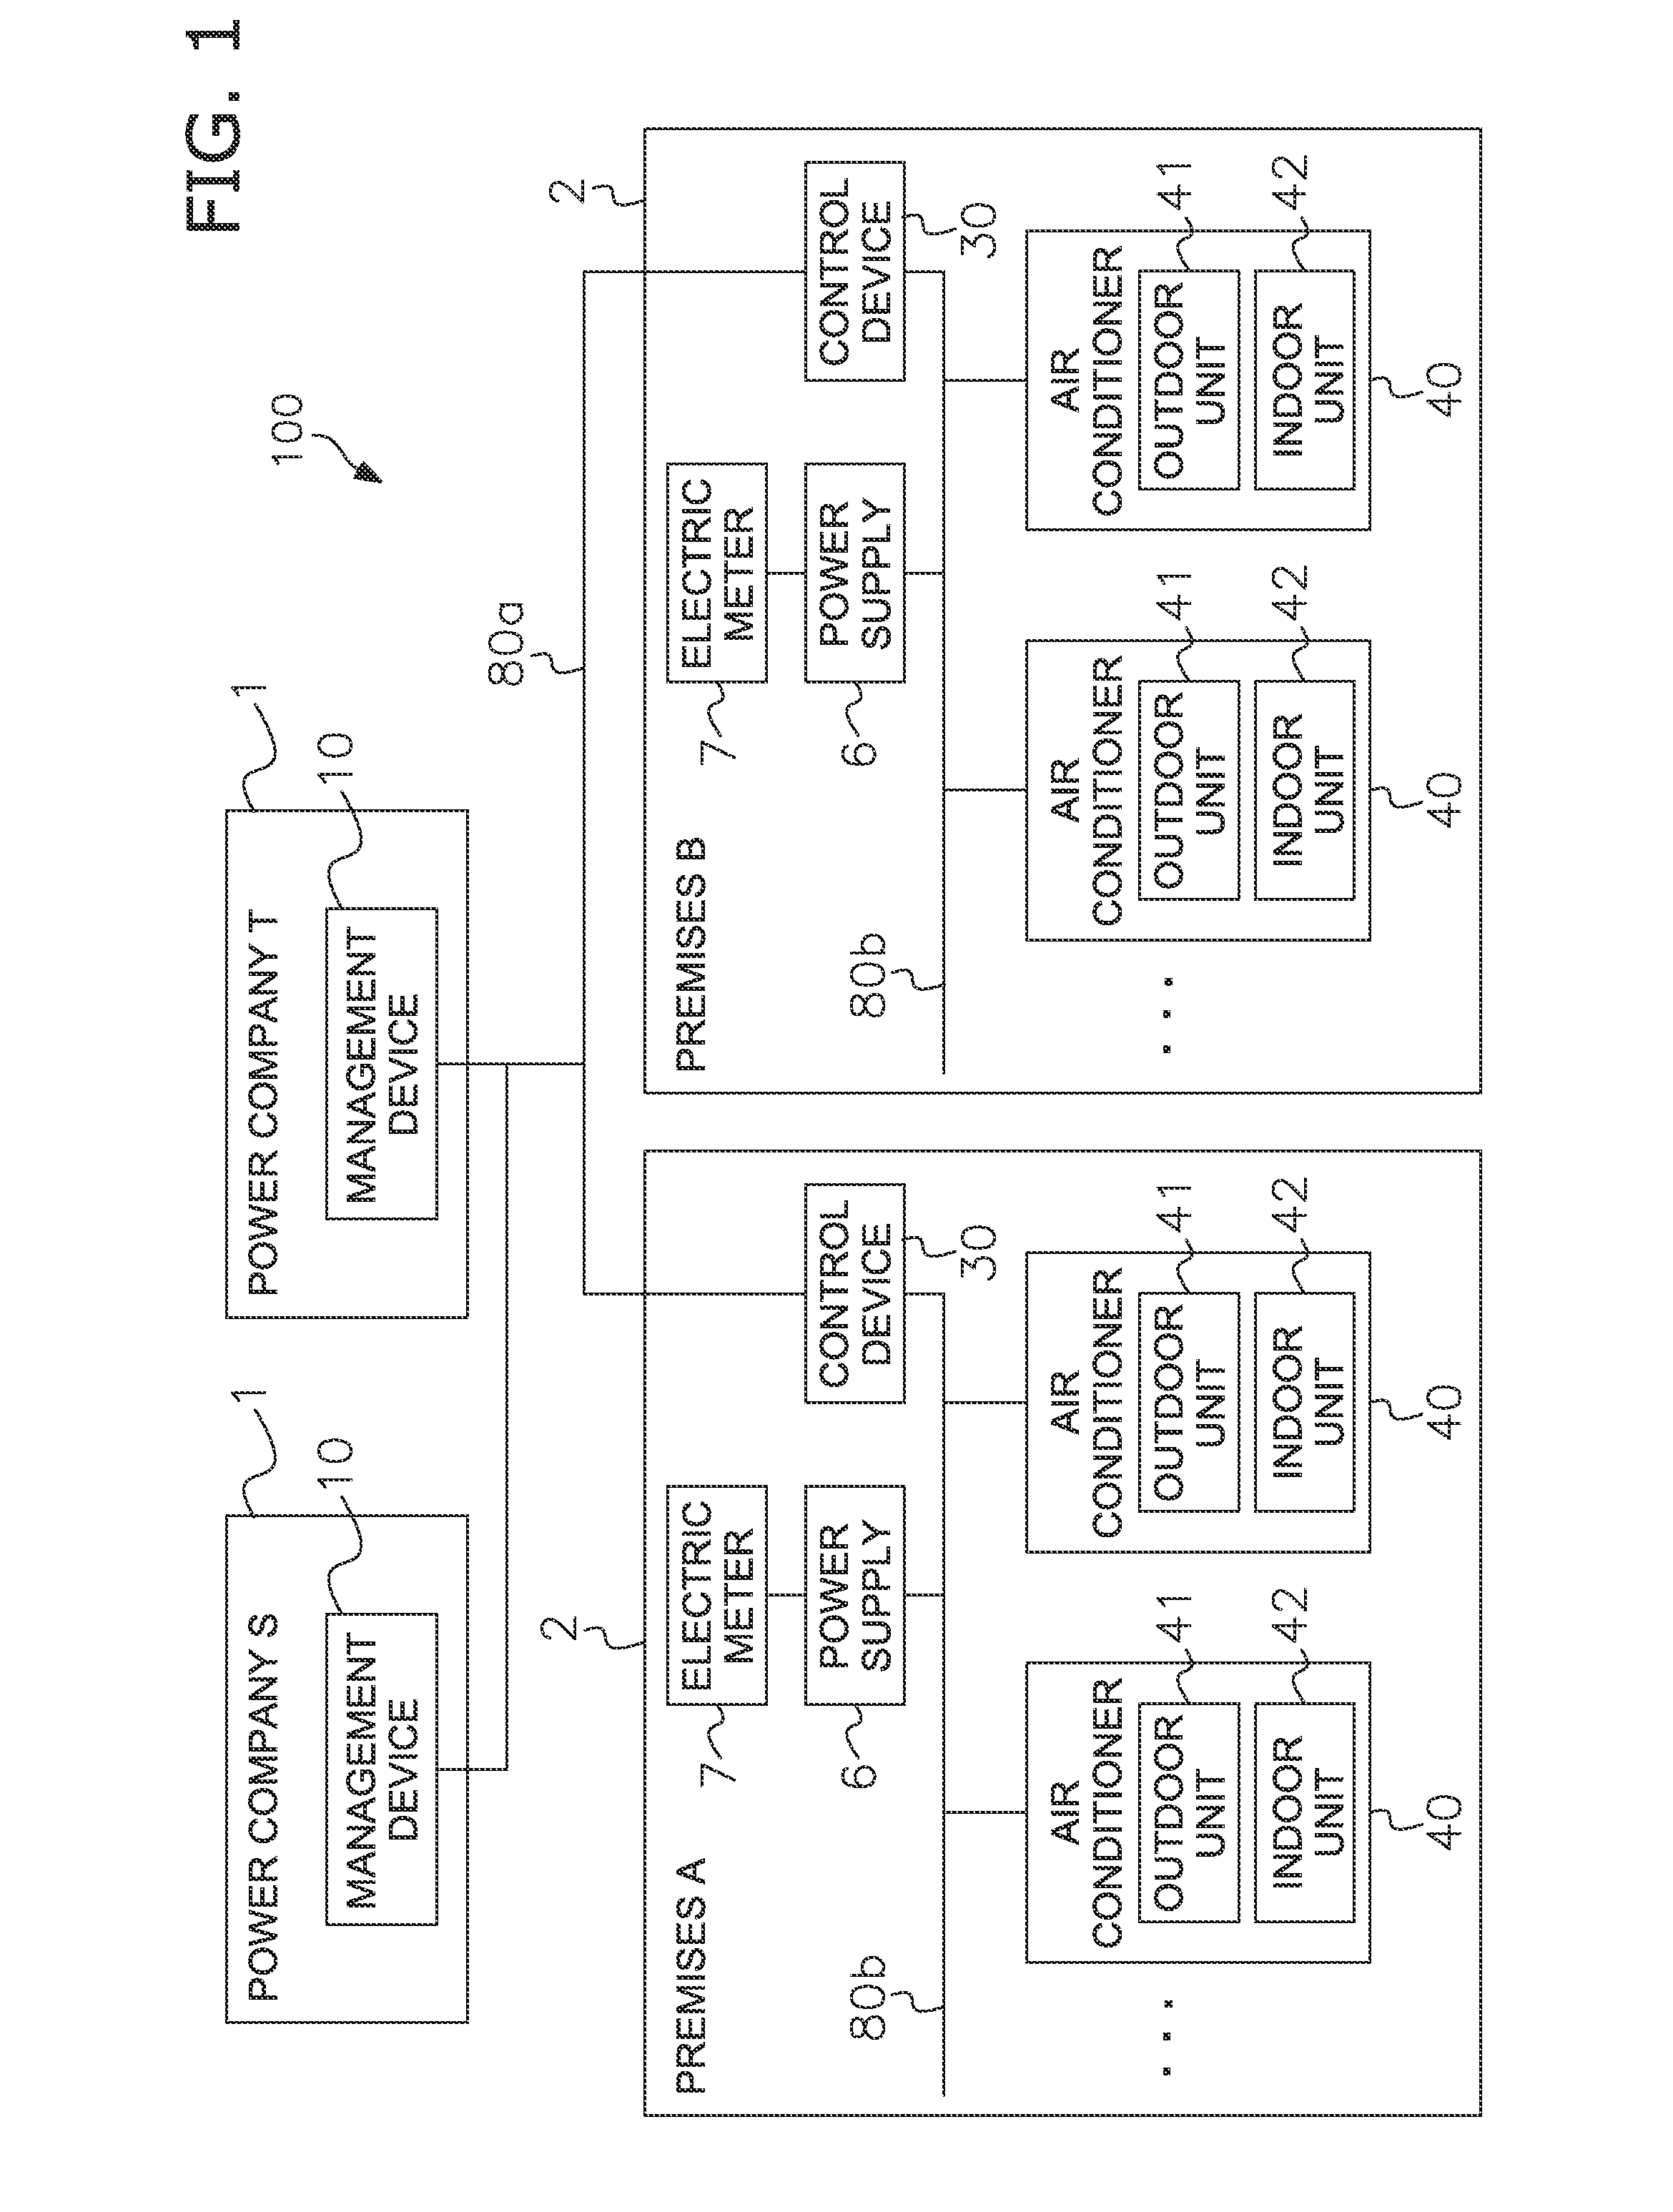 Control device for controlling facility equipment